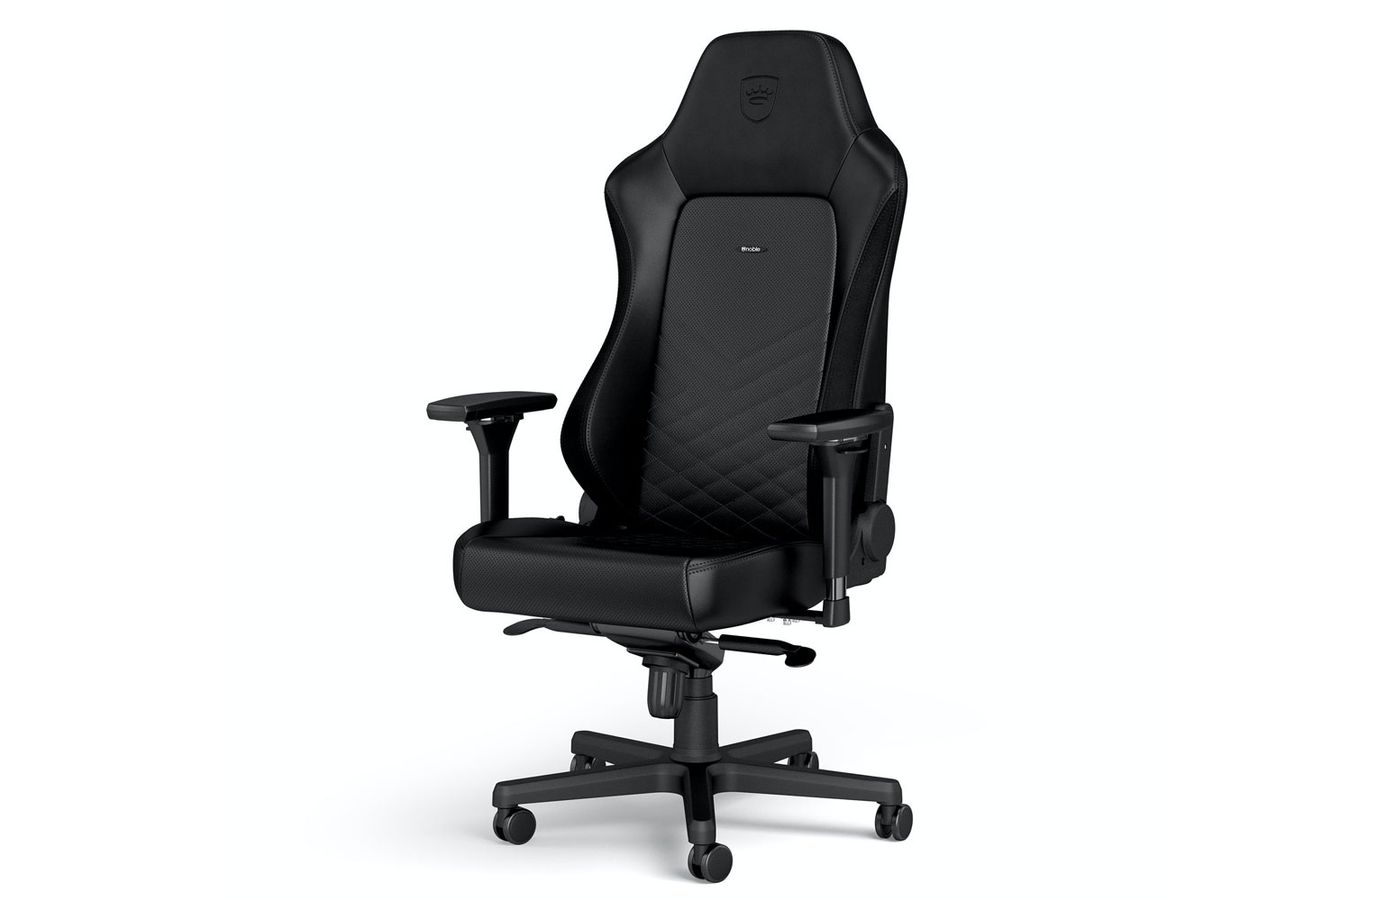 noblechairs Hero product image of an all-black office-style chair.